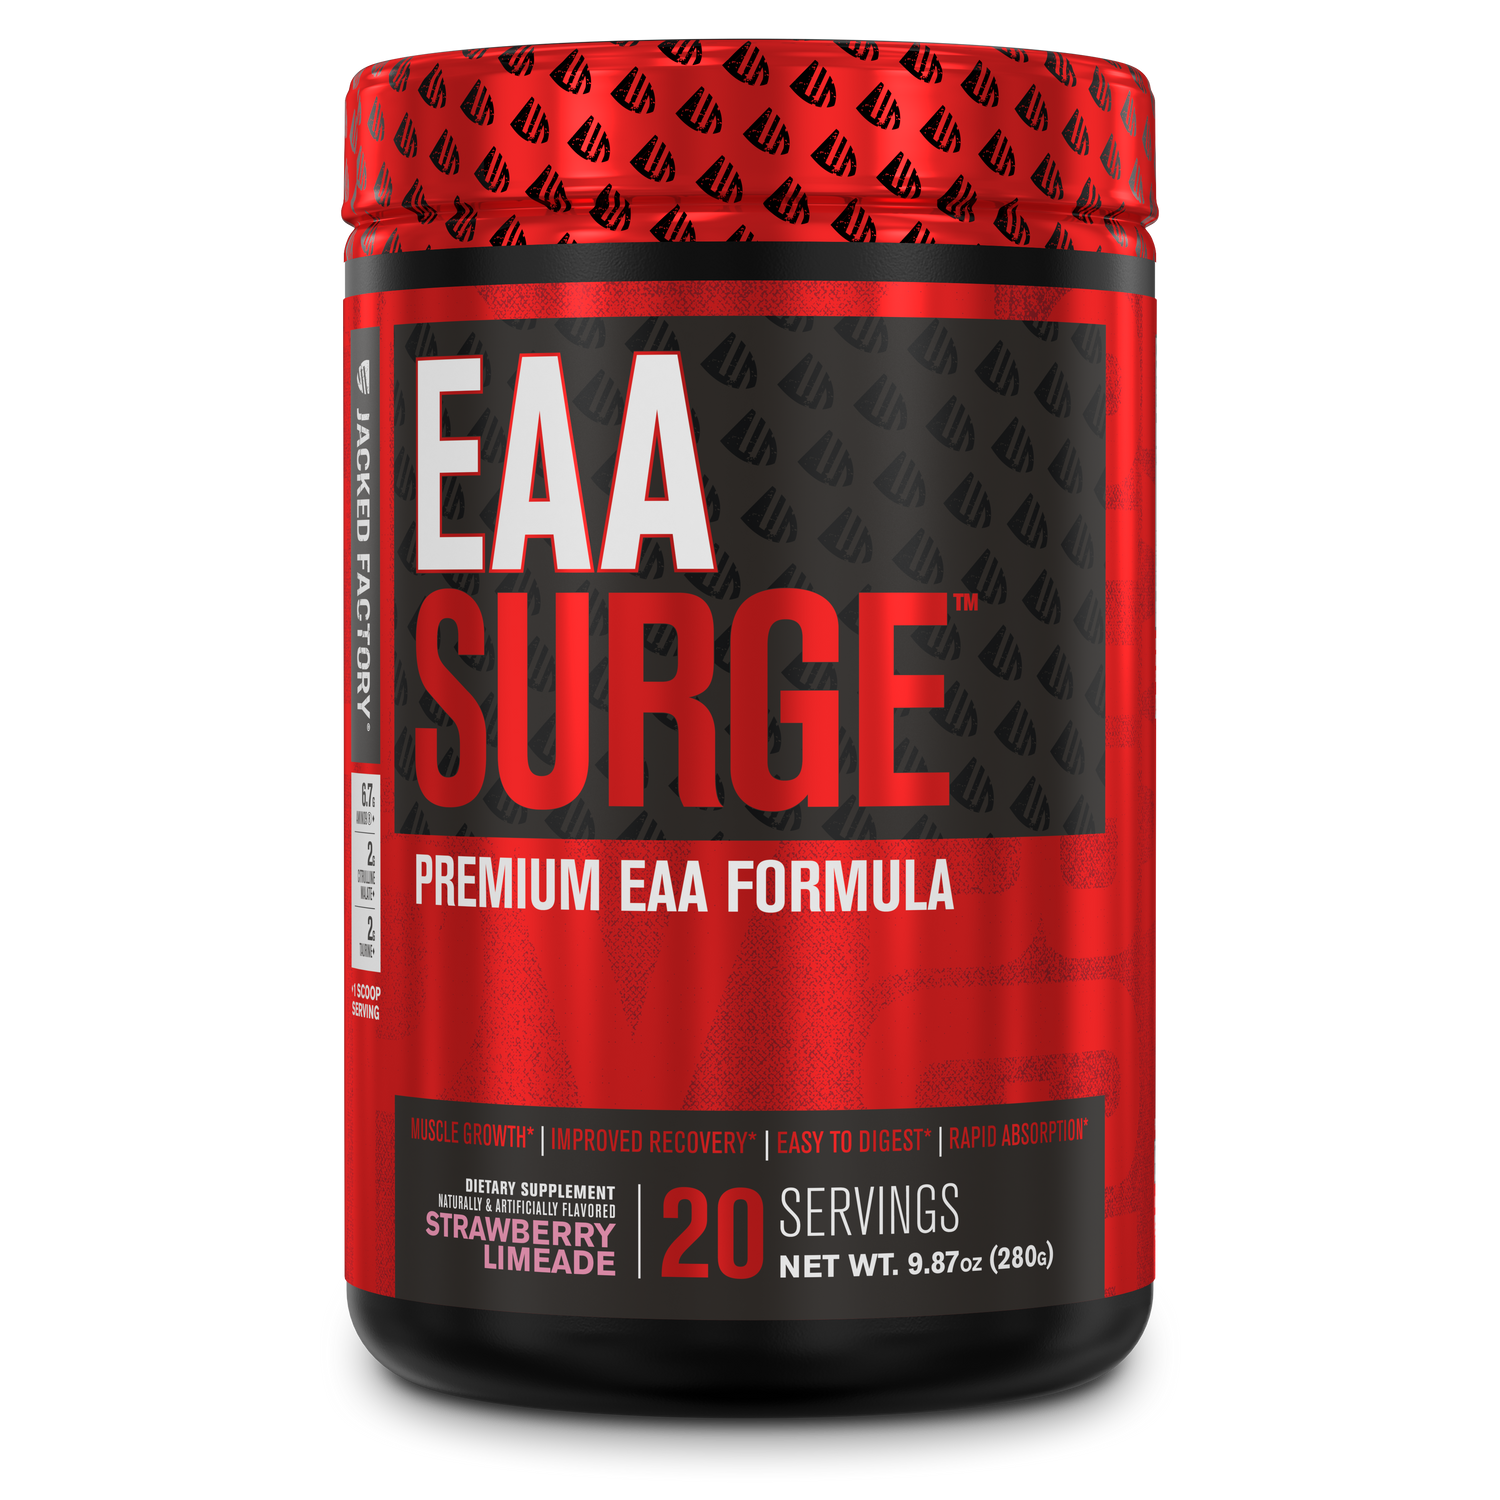 Jacked Factory's Strawberry Limeade EAA Surge (20 servings) in a black bottle with red label